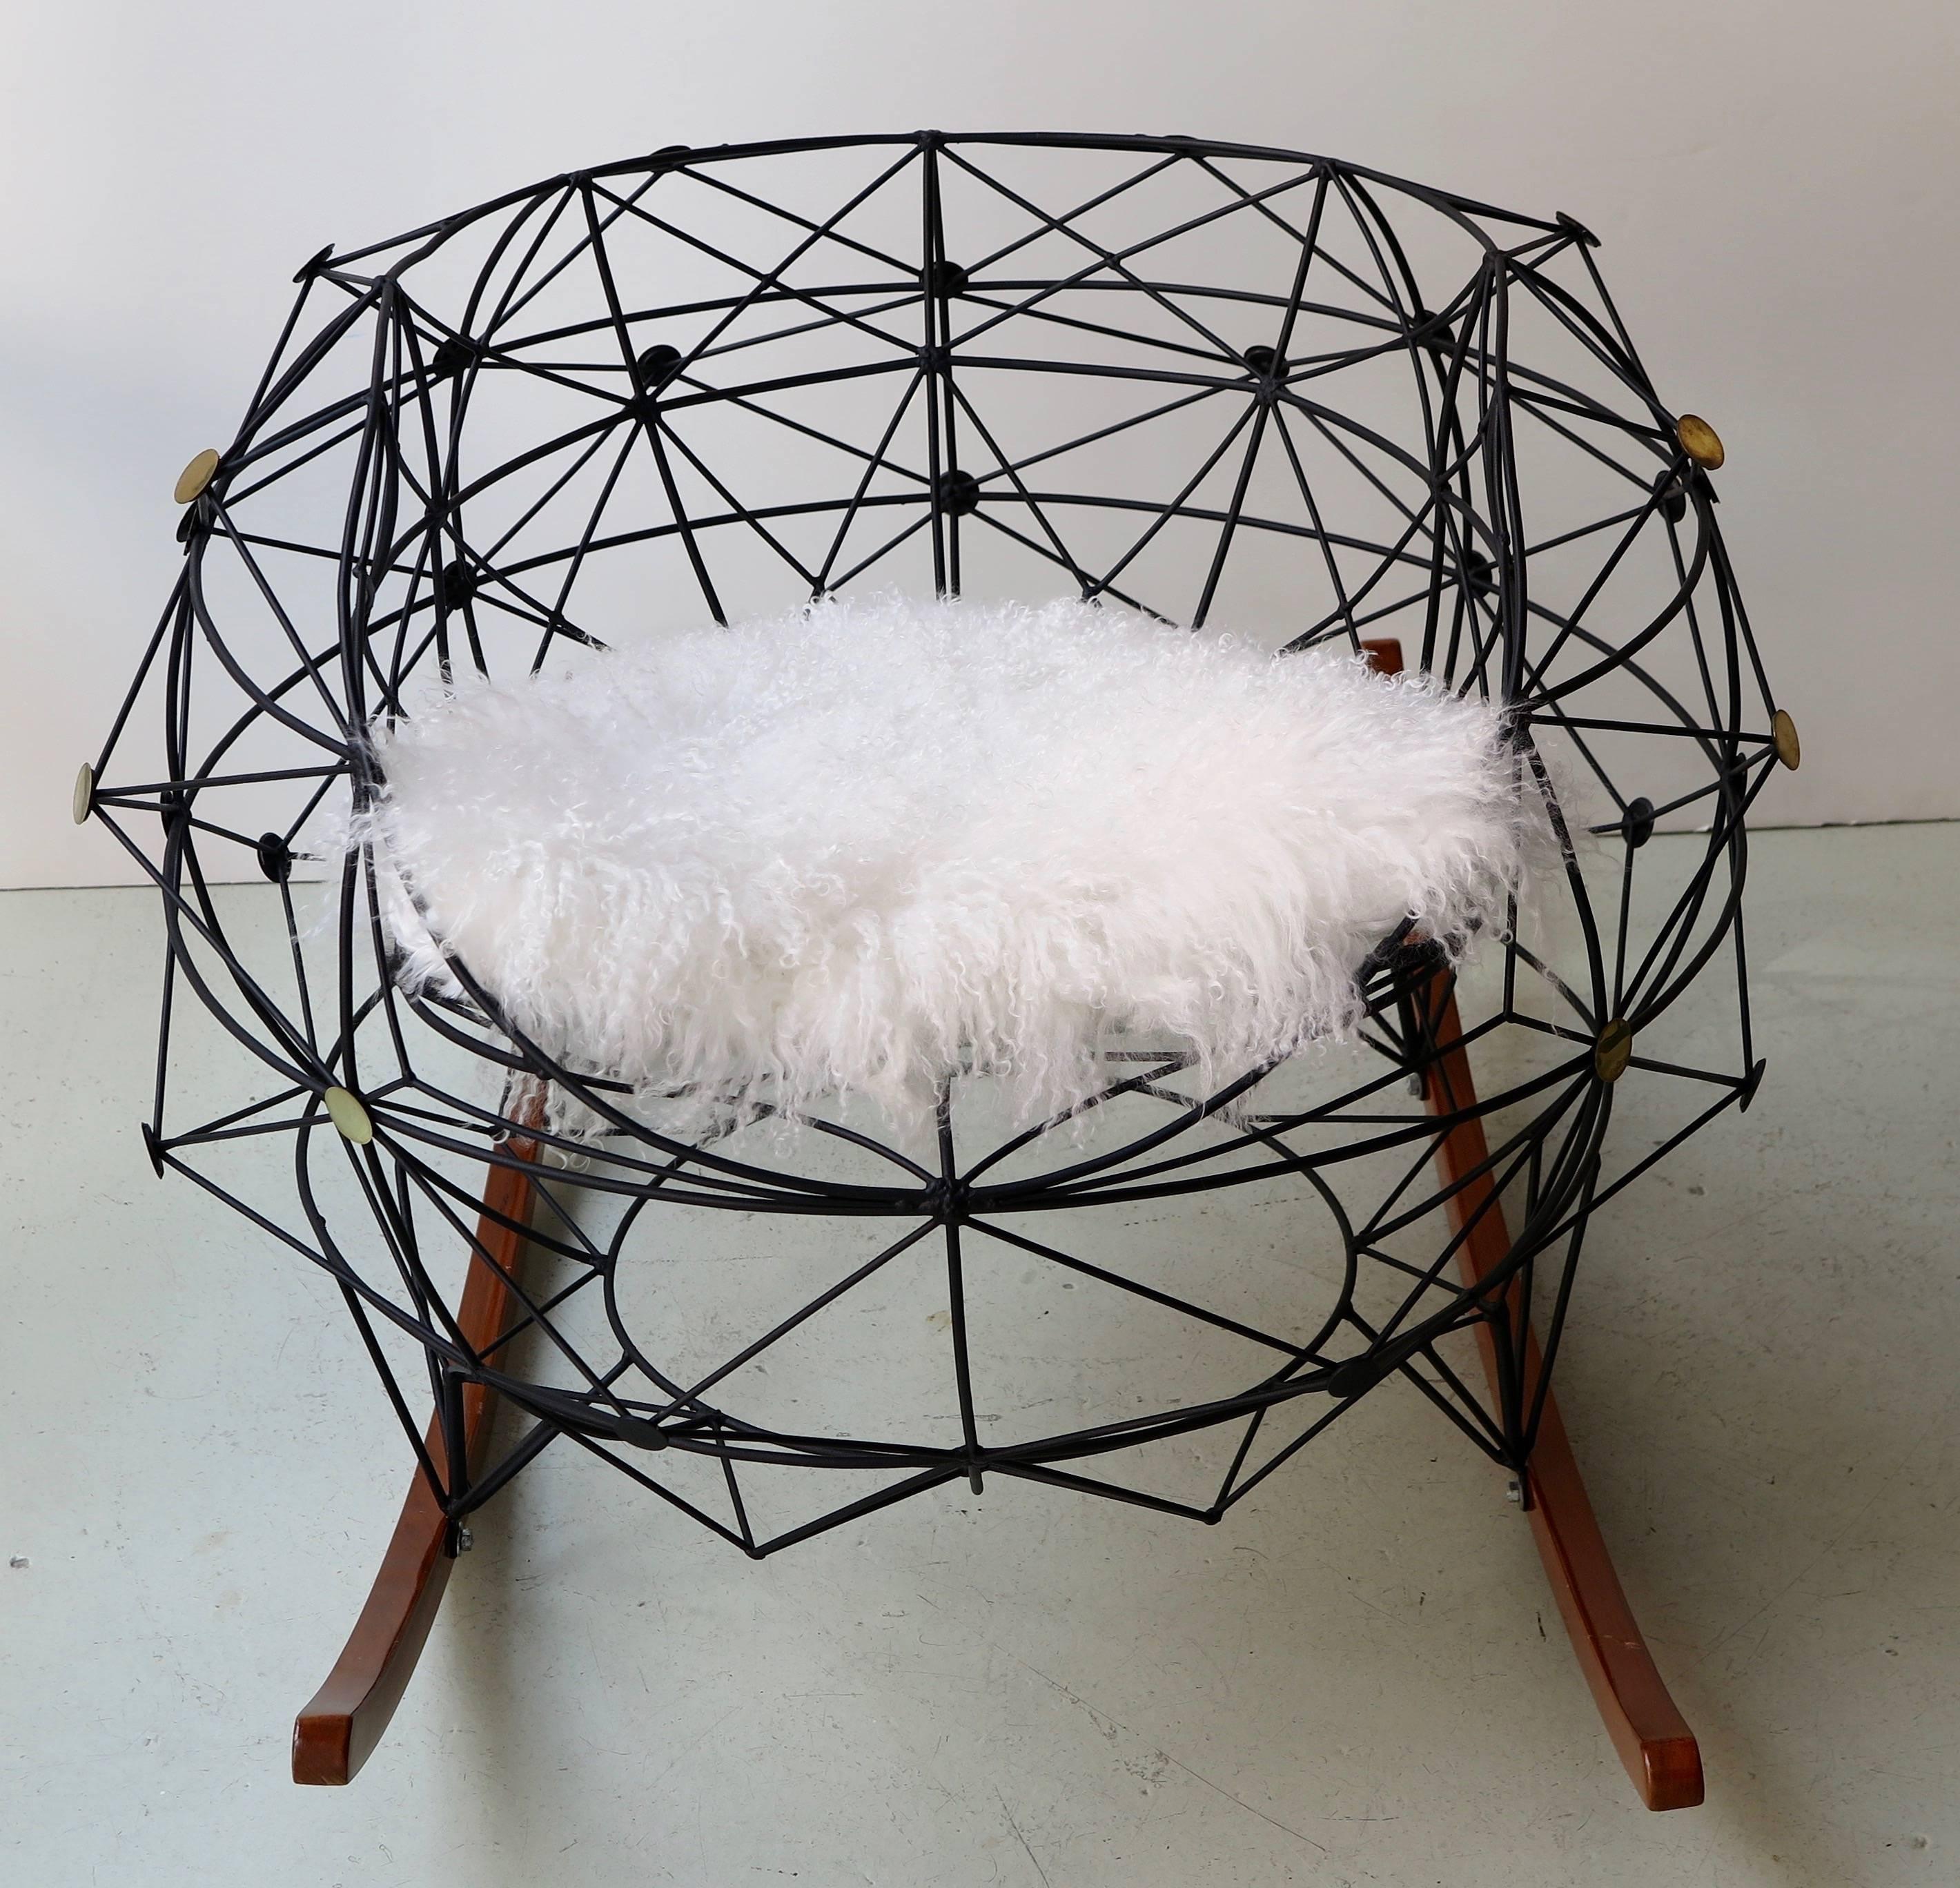 Functional art chair in powder coated wrought iron with brass insets and wooden legs by Baltasar Portillo, El Salvador, 2016. Inspired by the pattern of connecting stars in the sky within boundaries of what is known as the 